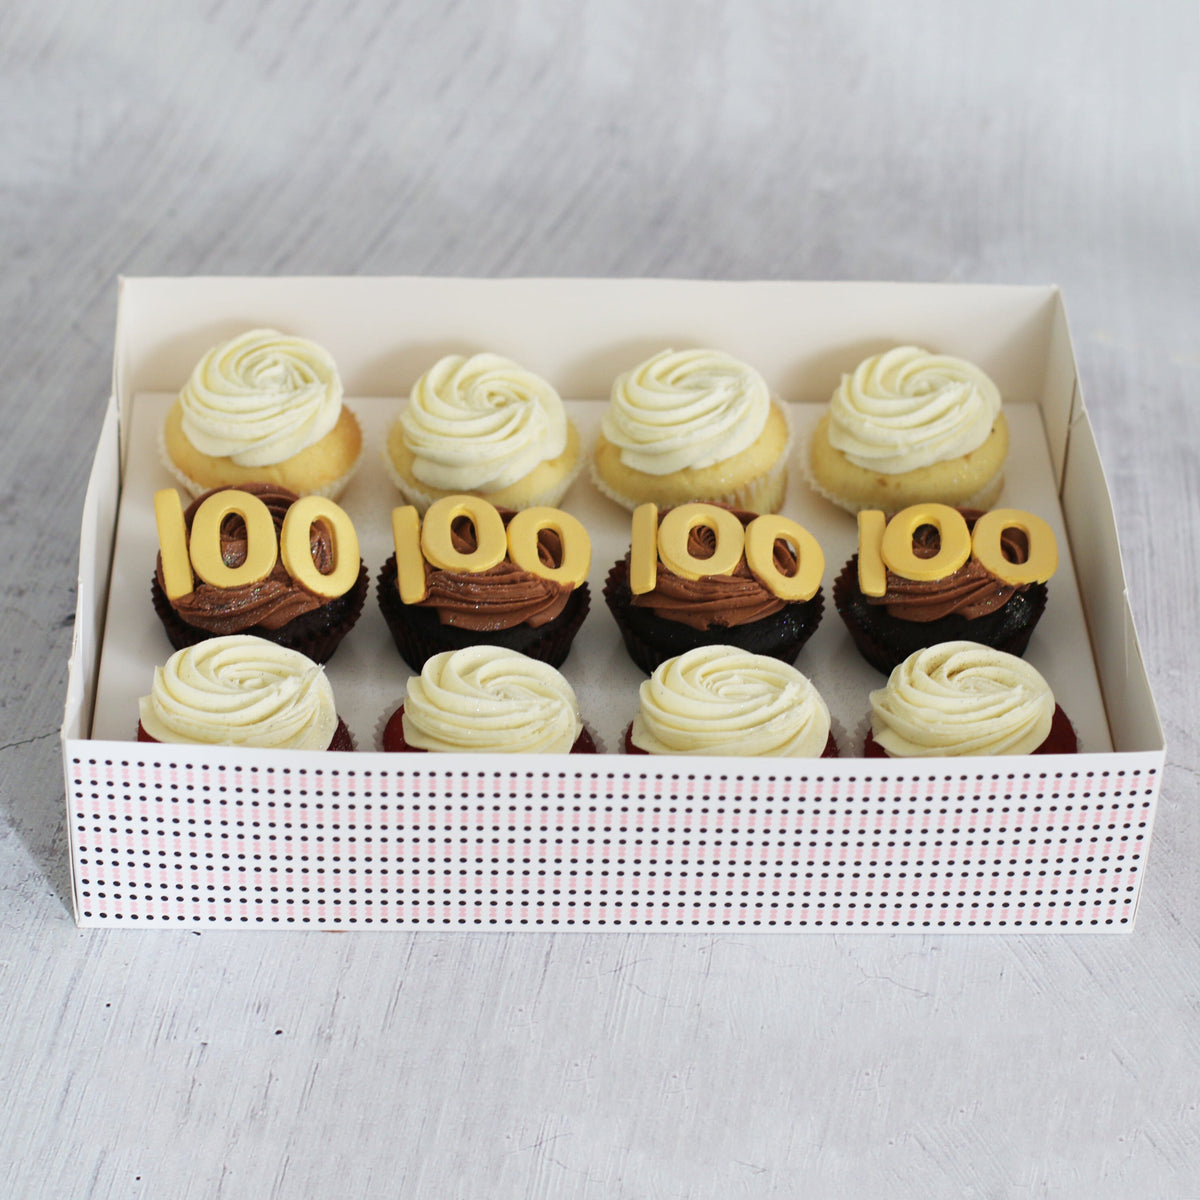 100th Birthday Cupcakes in GOLD Cupcakes The Cupcake Queens 